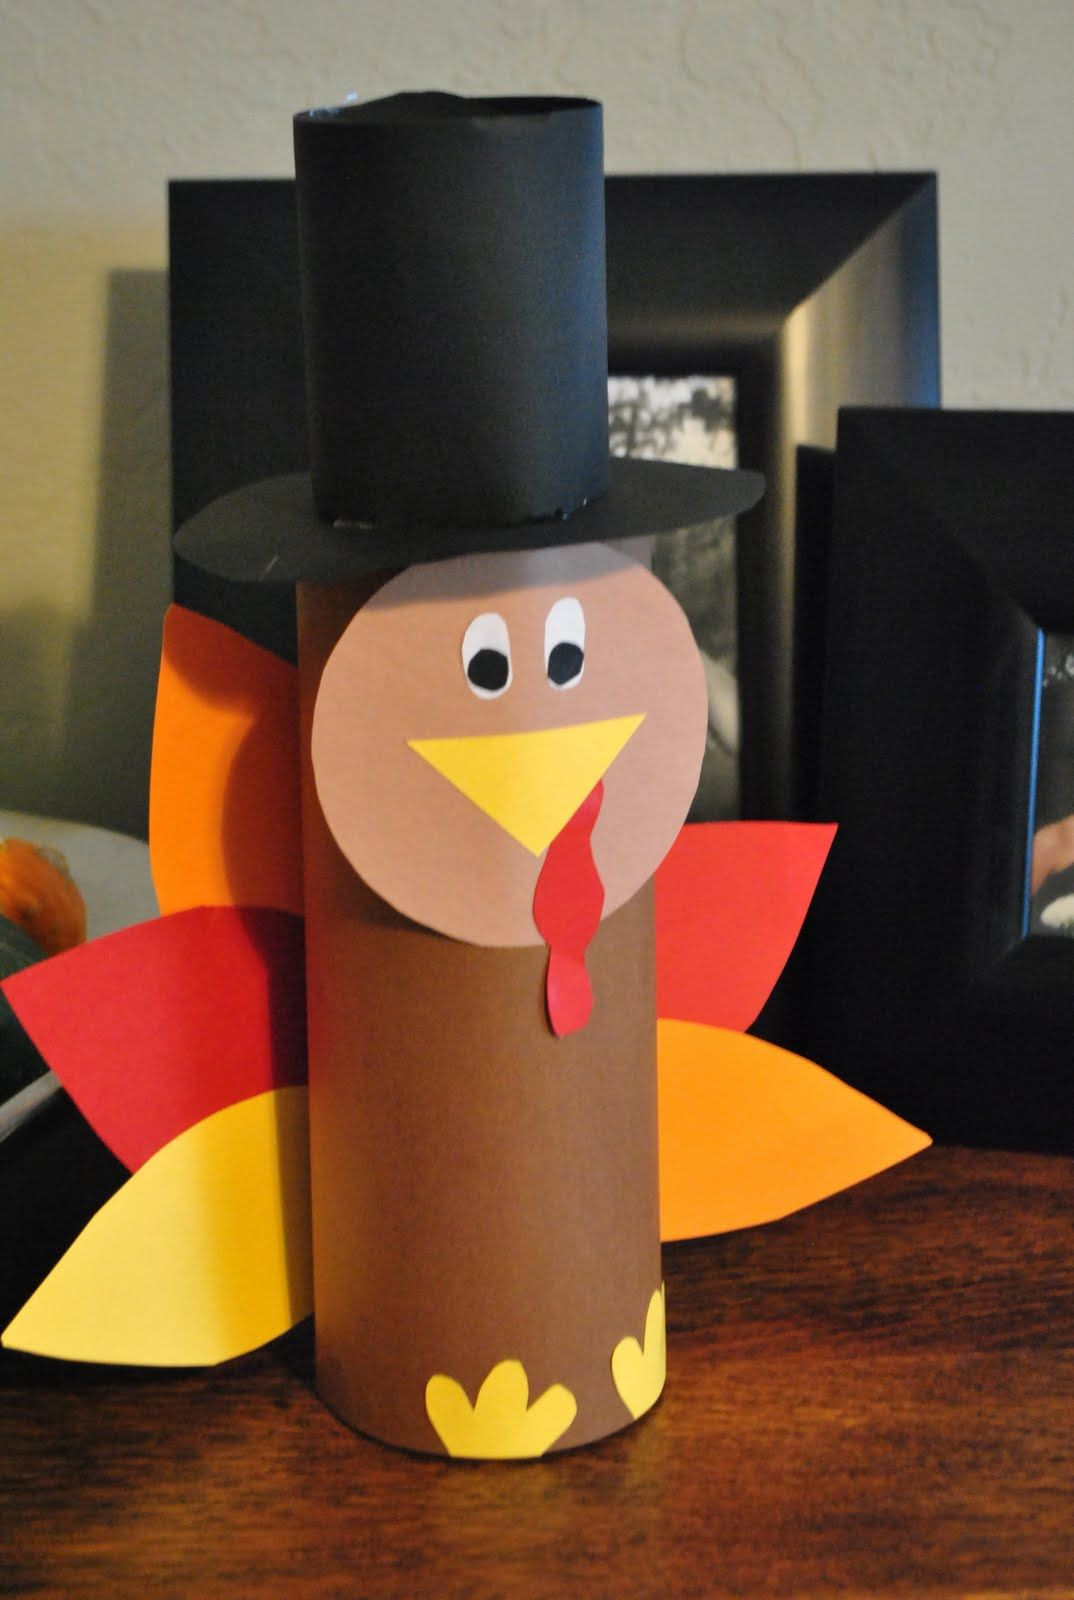 Thanksgiving Toilet Paper Roll Crafts
 Chipper Recycle Crafts 5 Ways to Make a Turkey